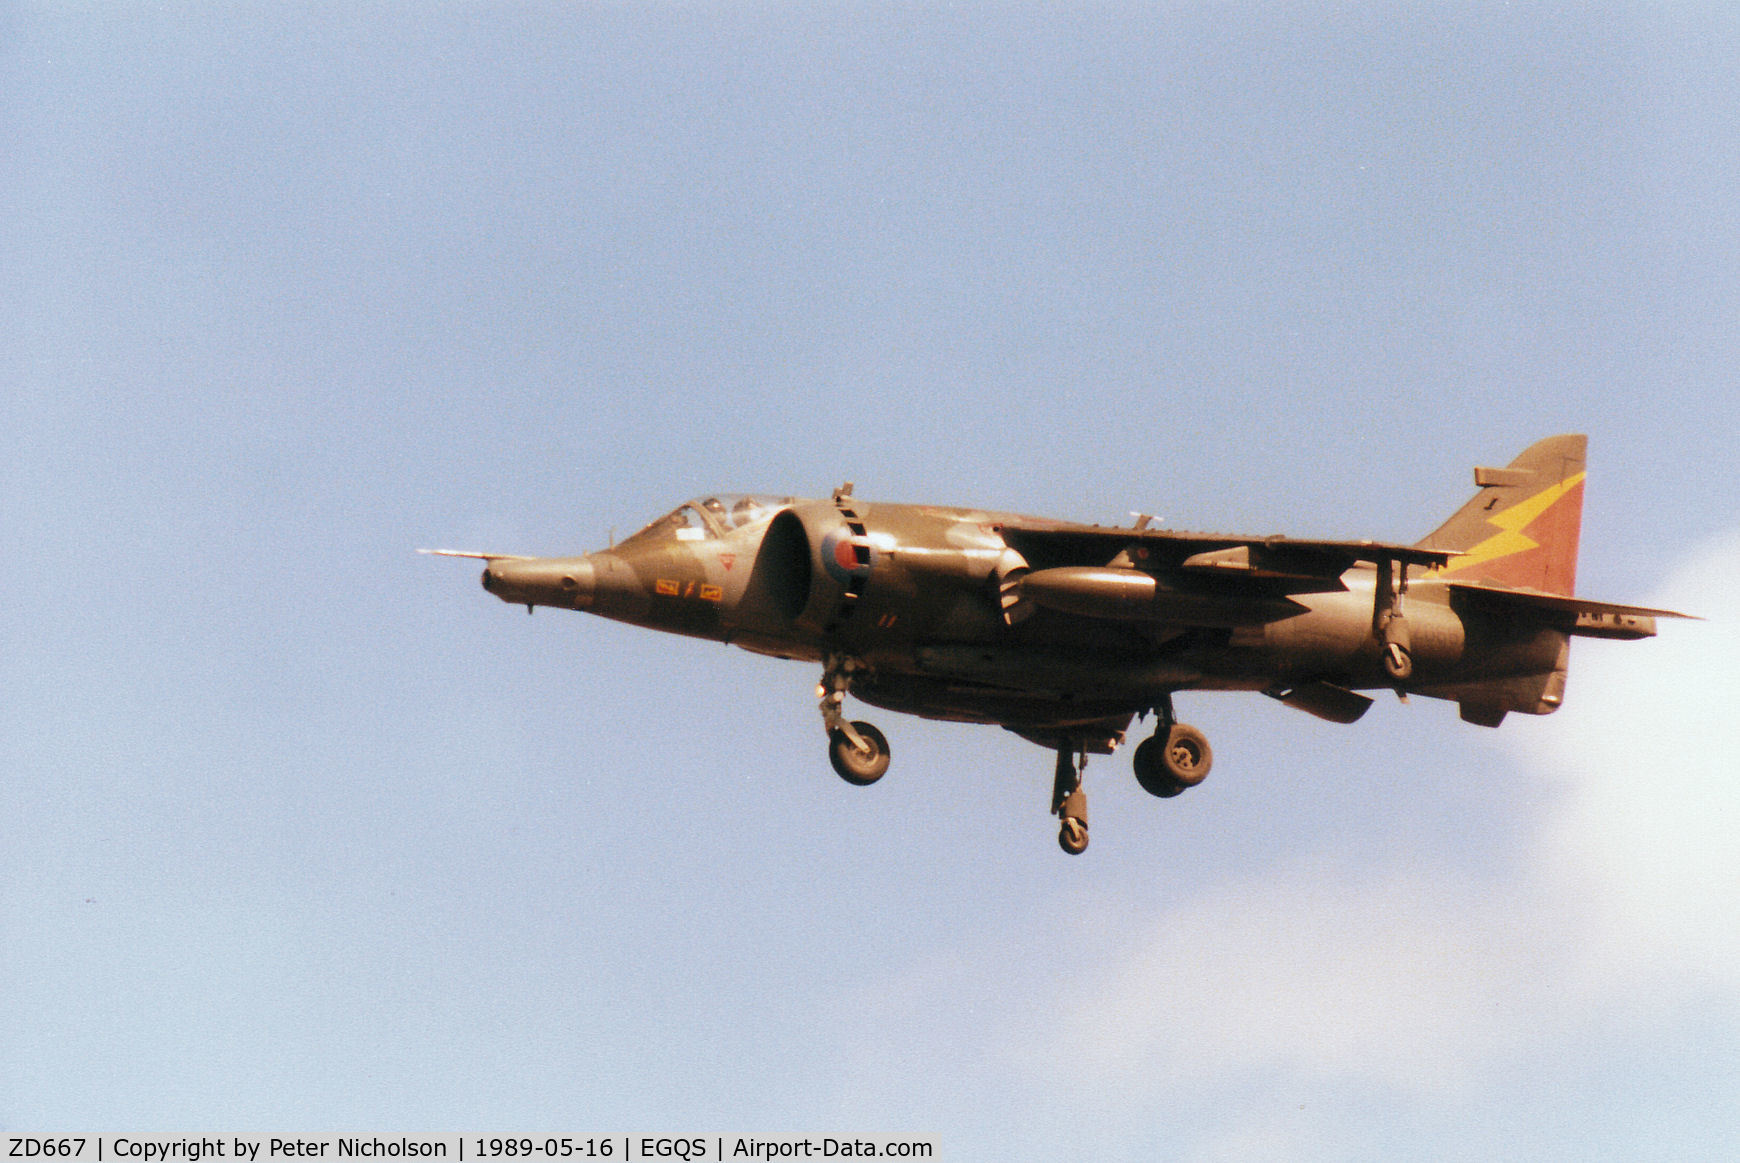 ZD667, 1986 British Aerospace Harrier GR.3 C/N 712228, Harrier GR.3 of 4 Squadron based then at RAF Gutersloh landing on Runway 23 at RAF Lossiemouth in May 1989.